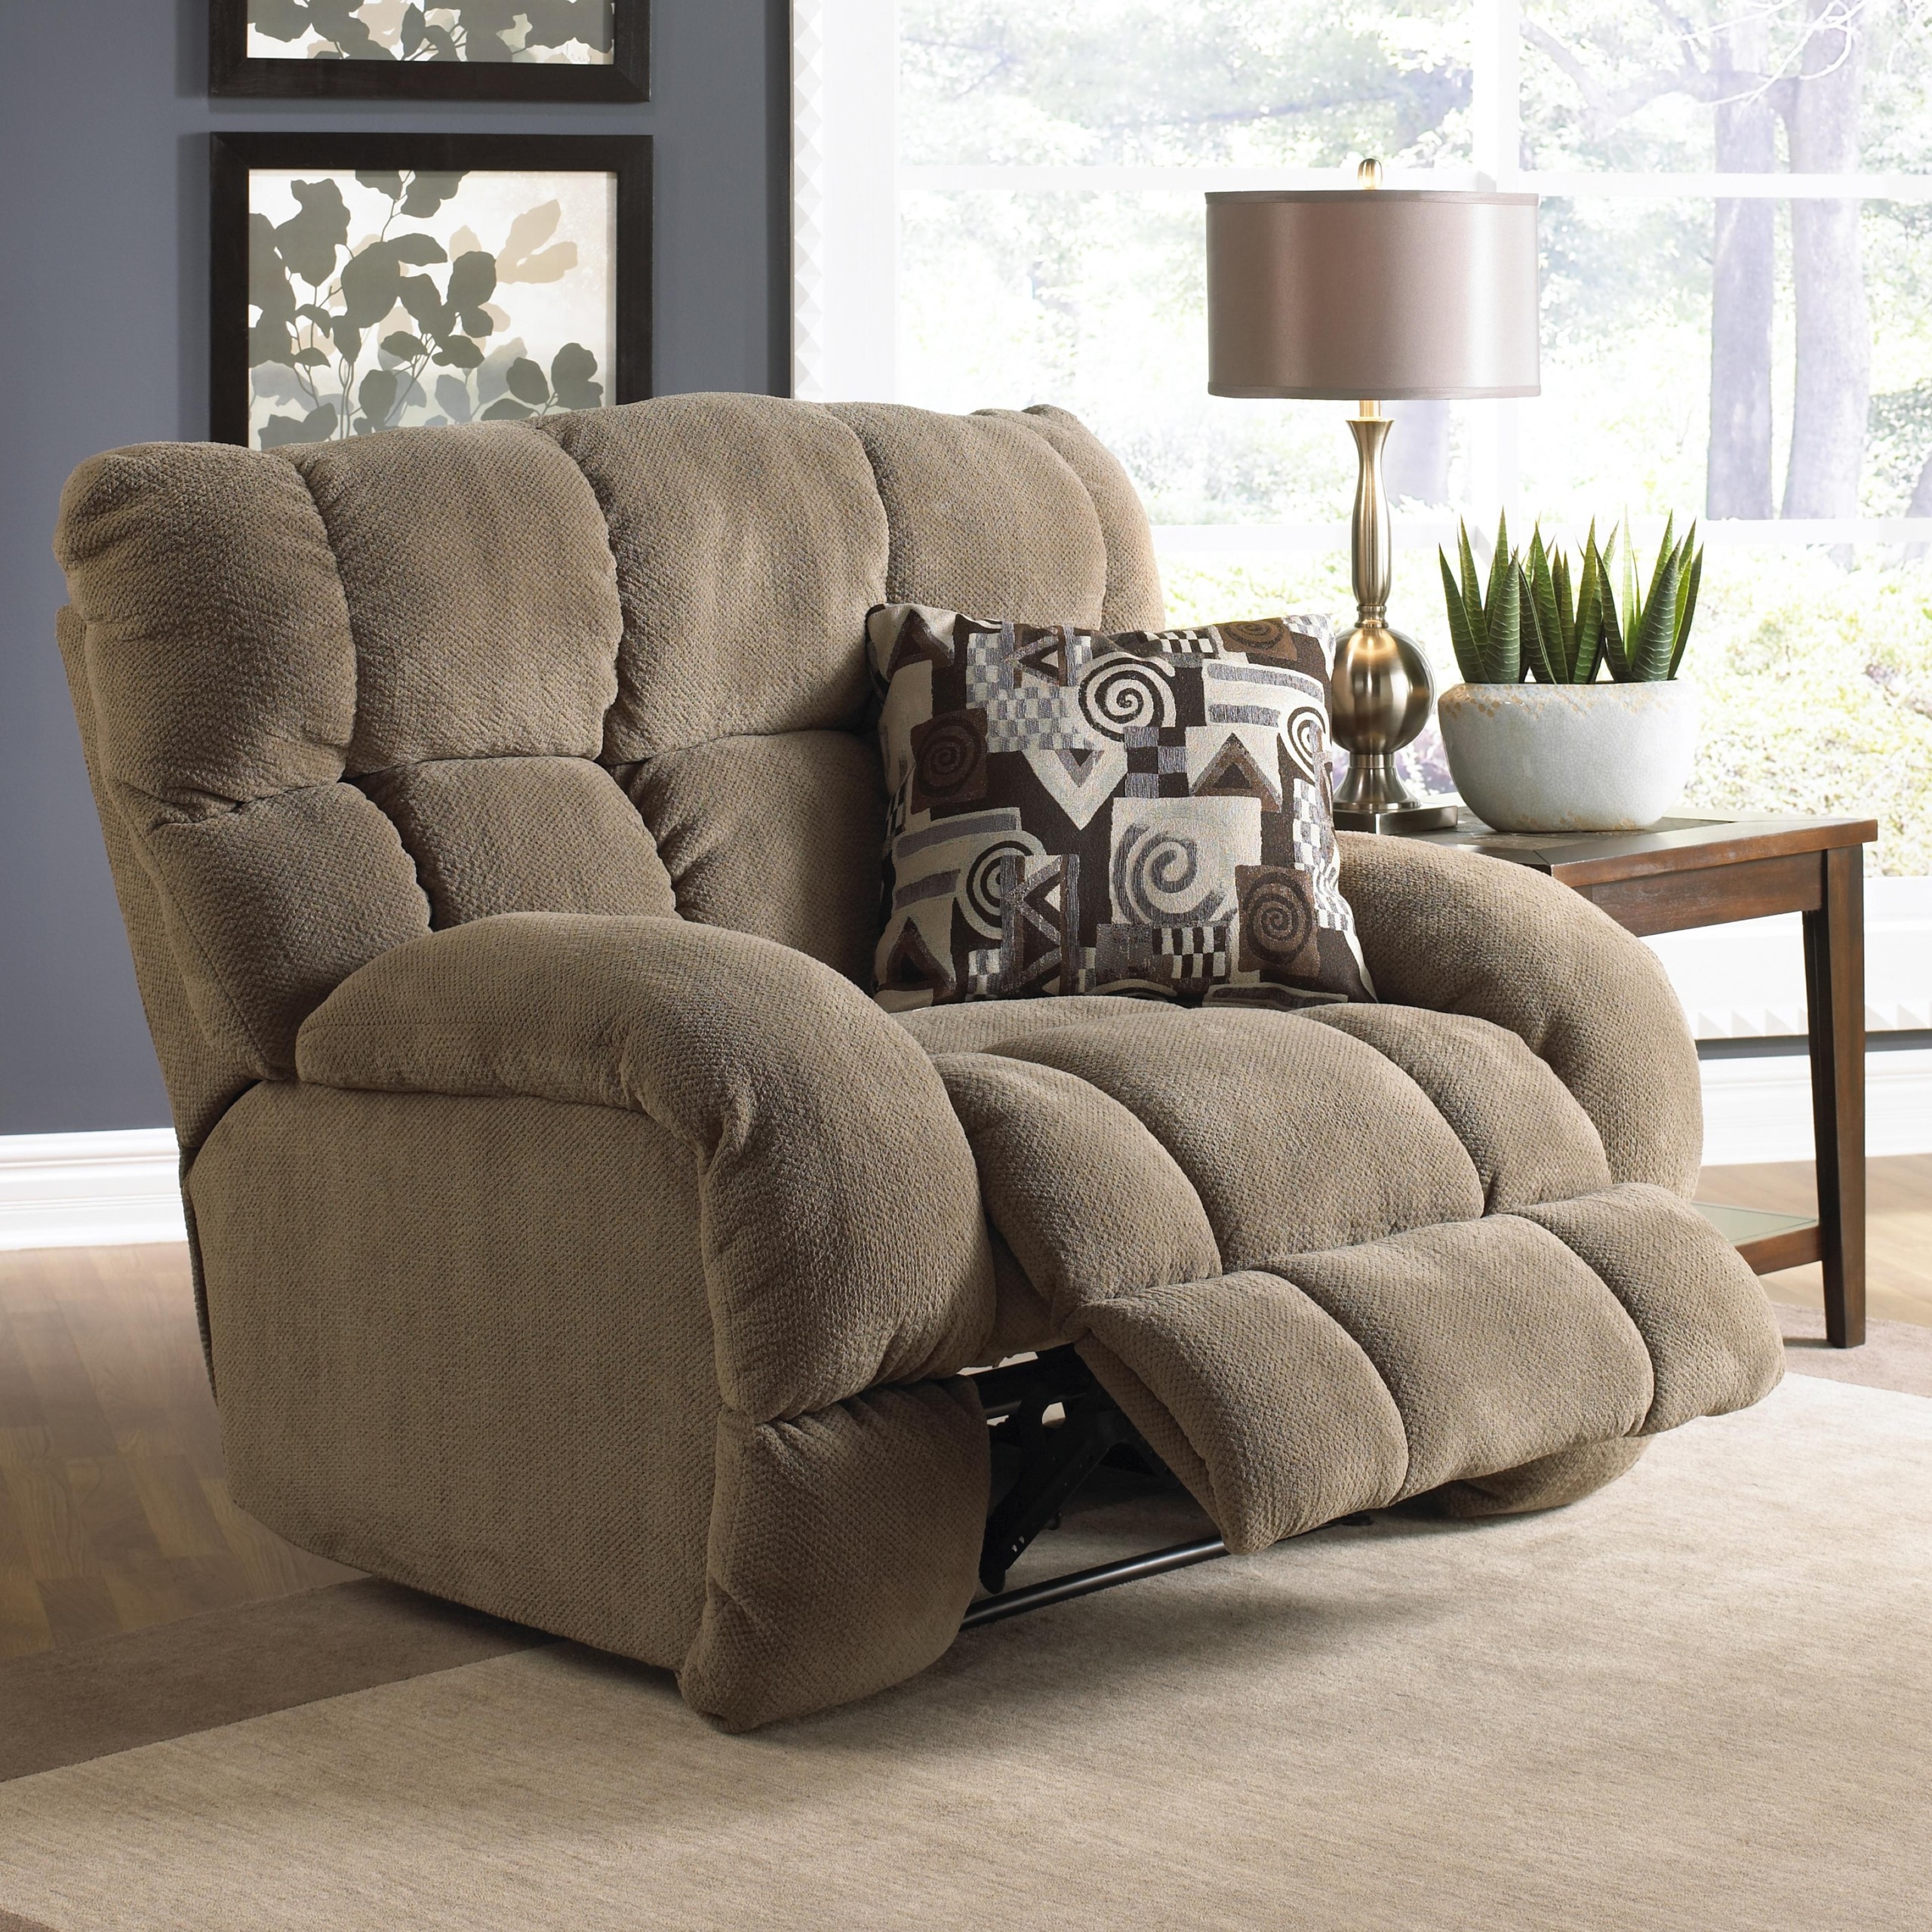 Siesta lay flat recliner with extra wide seat by catnapper